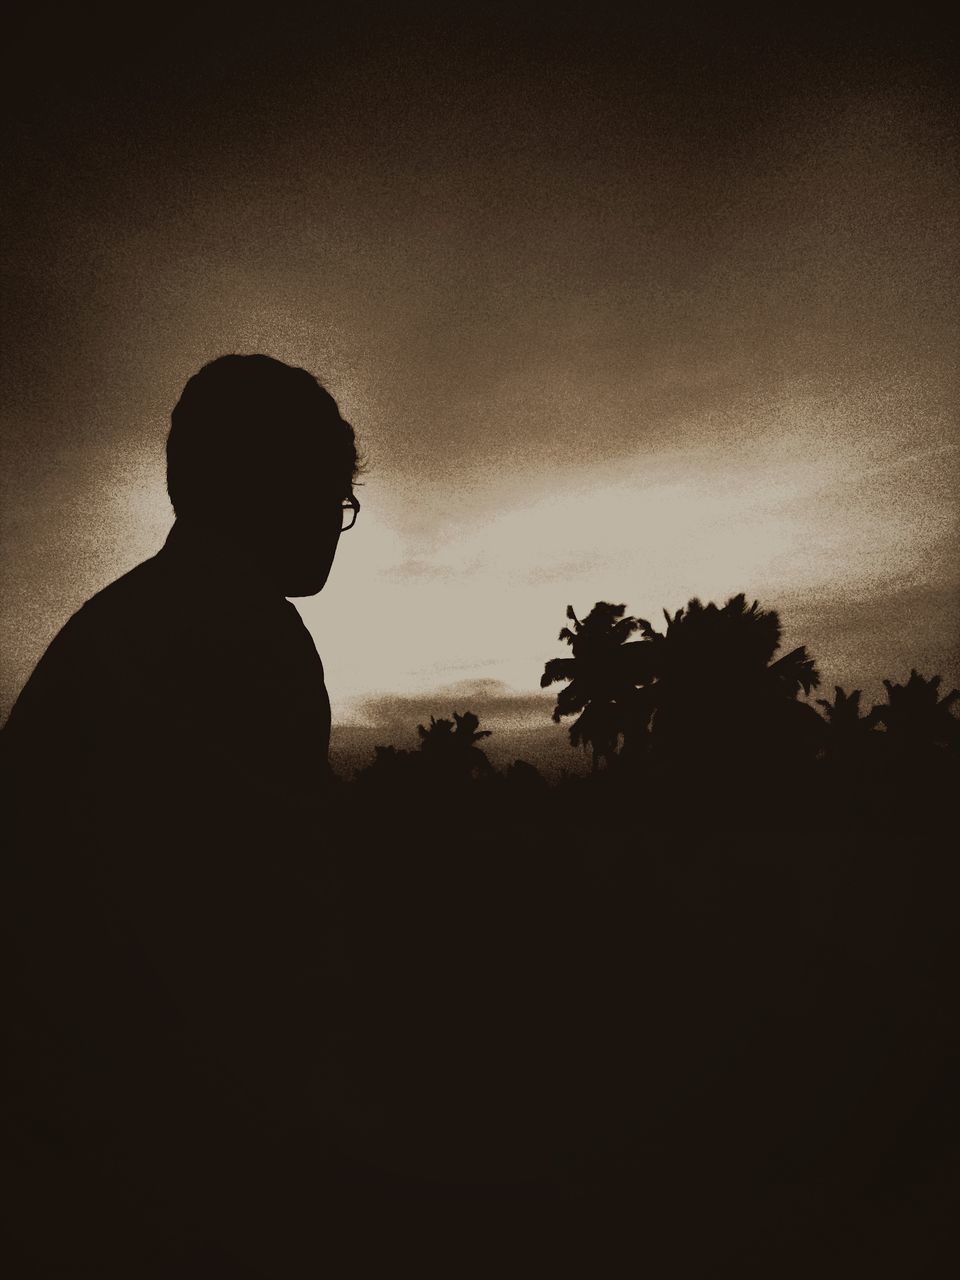 silhouette, sky, one person, men, real people, lifestyles, copy space, nature, leisure activity, plant, sunset, tree, tranquility, land, beauty in nature, scenics - nature, standing, tranquil scene, outdoors, contemplation